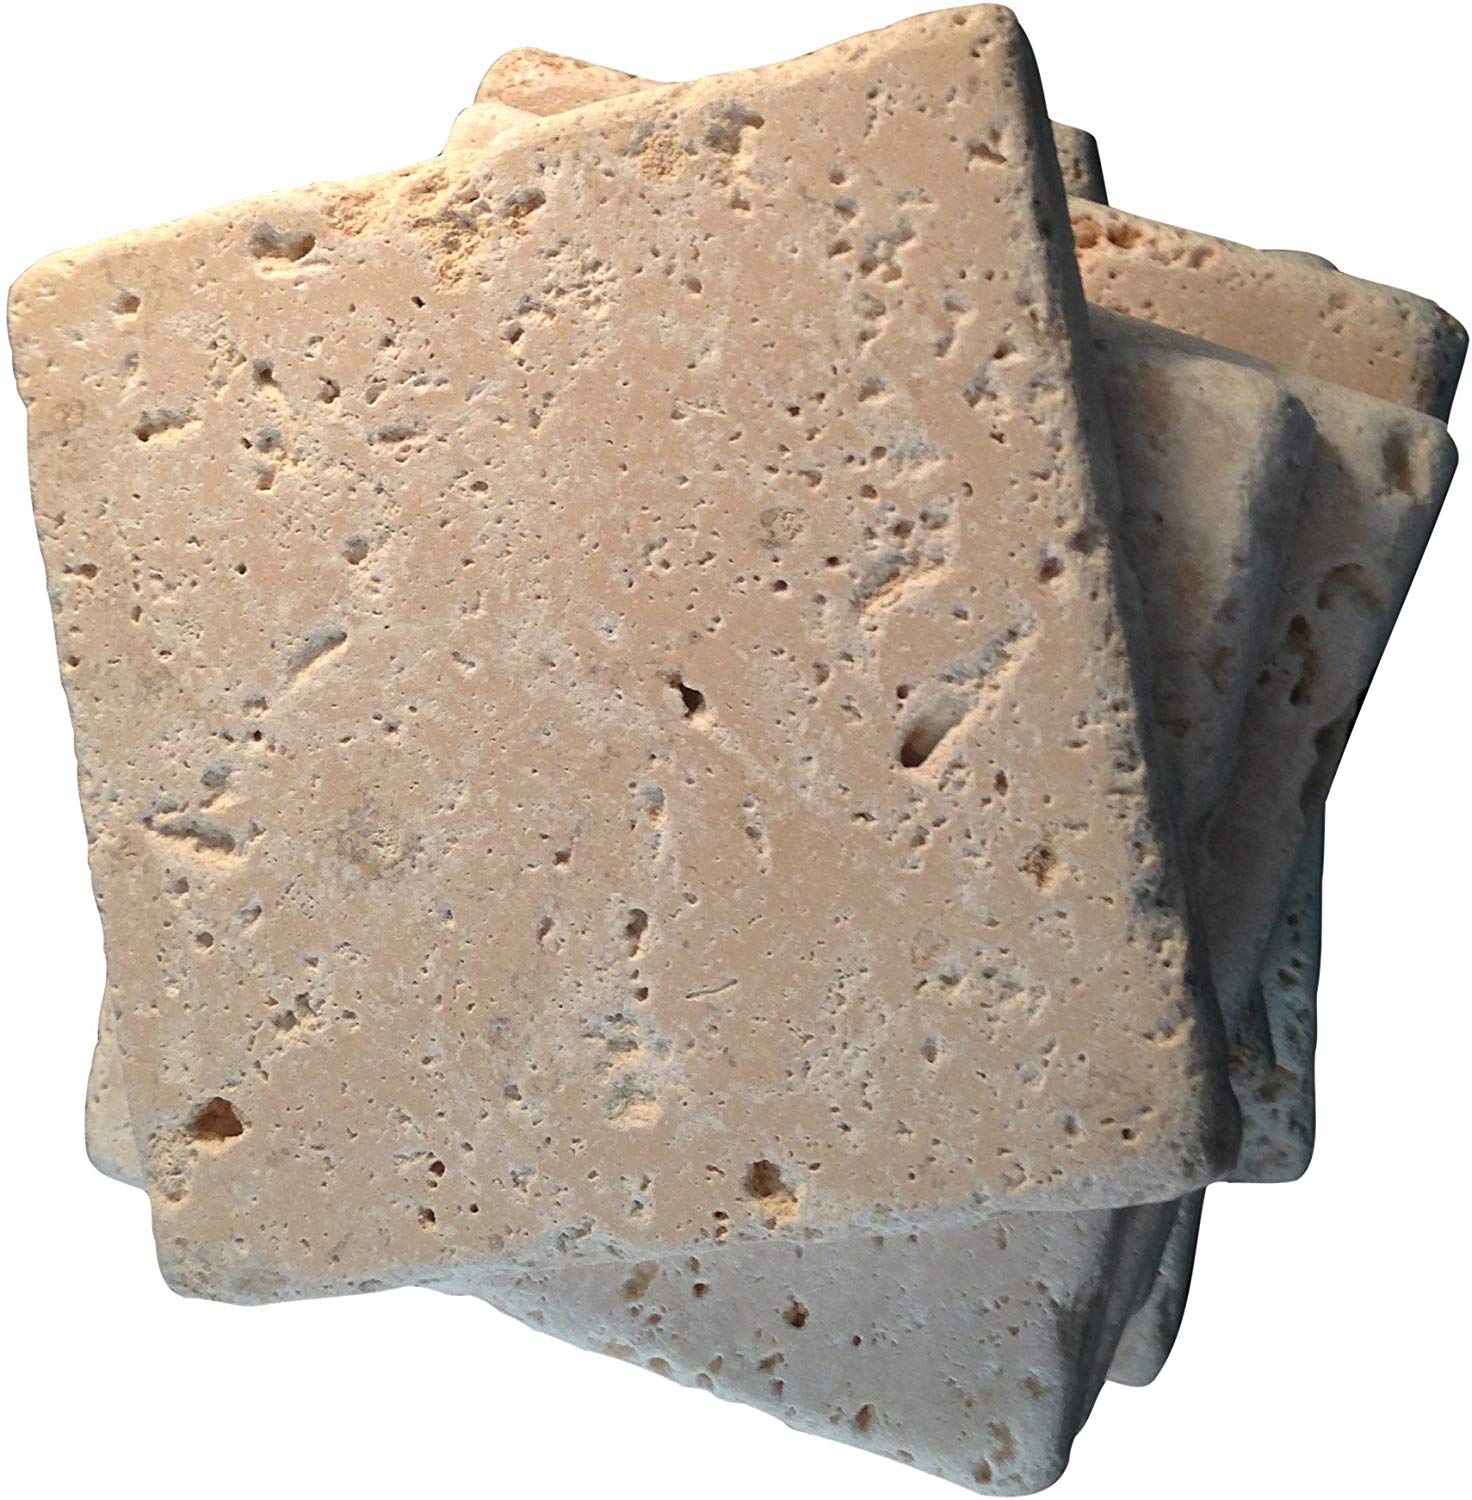 Coaster Tile-tumbled Travertine Porous Craft Floor Wall Tile in Ivory Color -4x4 (8 Pieces)